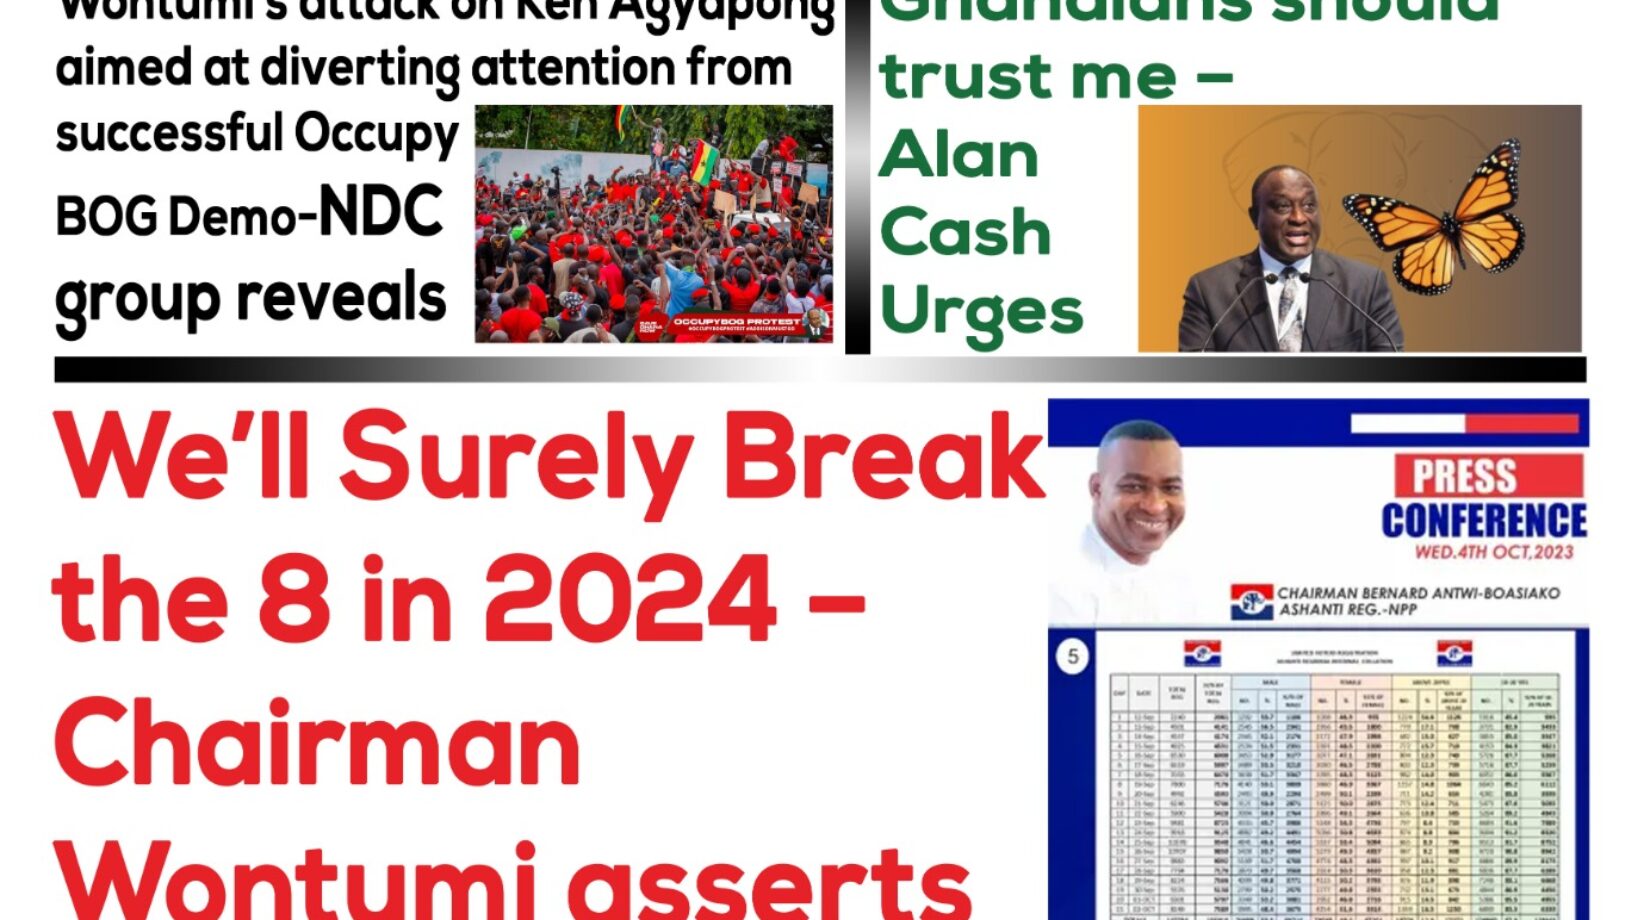 Thursday,5th October,2023 Edition of The New Trust Newspaper